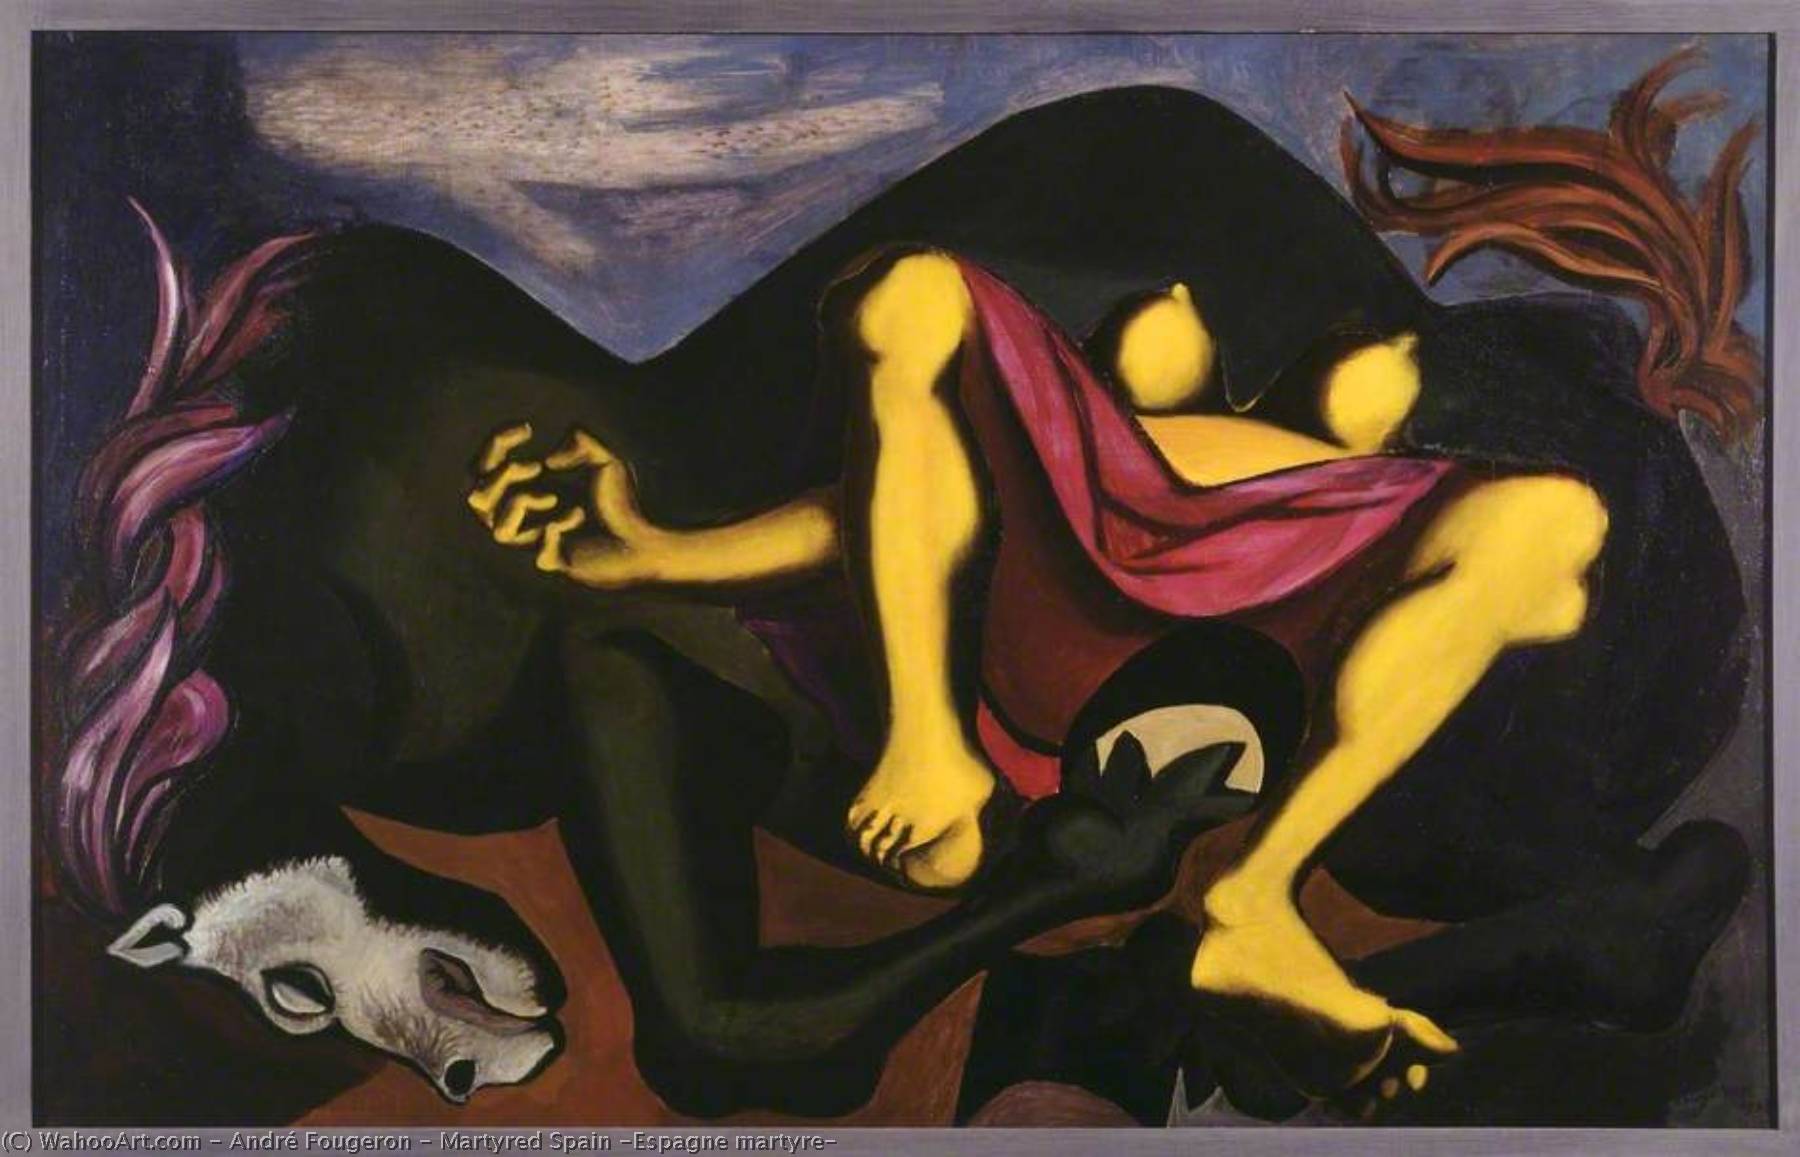 Order Oil Painting Replica Martyred Spain (Espagne martyre), 1937 by André Fougeron (Inspired By) (1913-1998) | ArtsDot.com